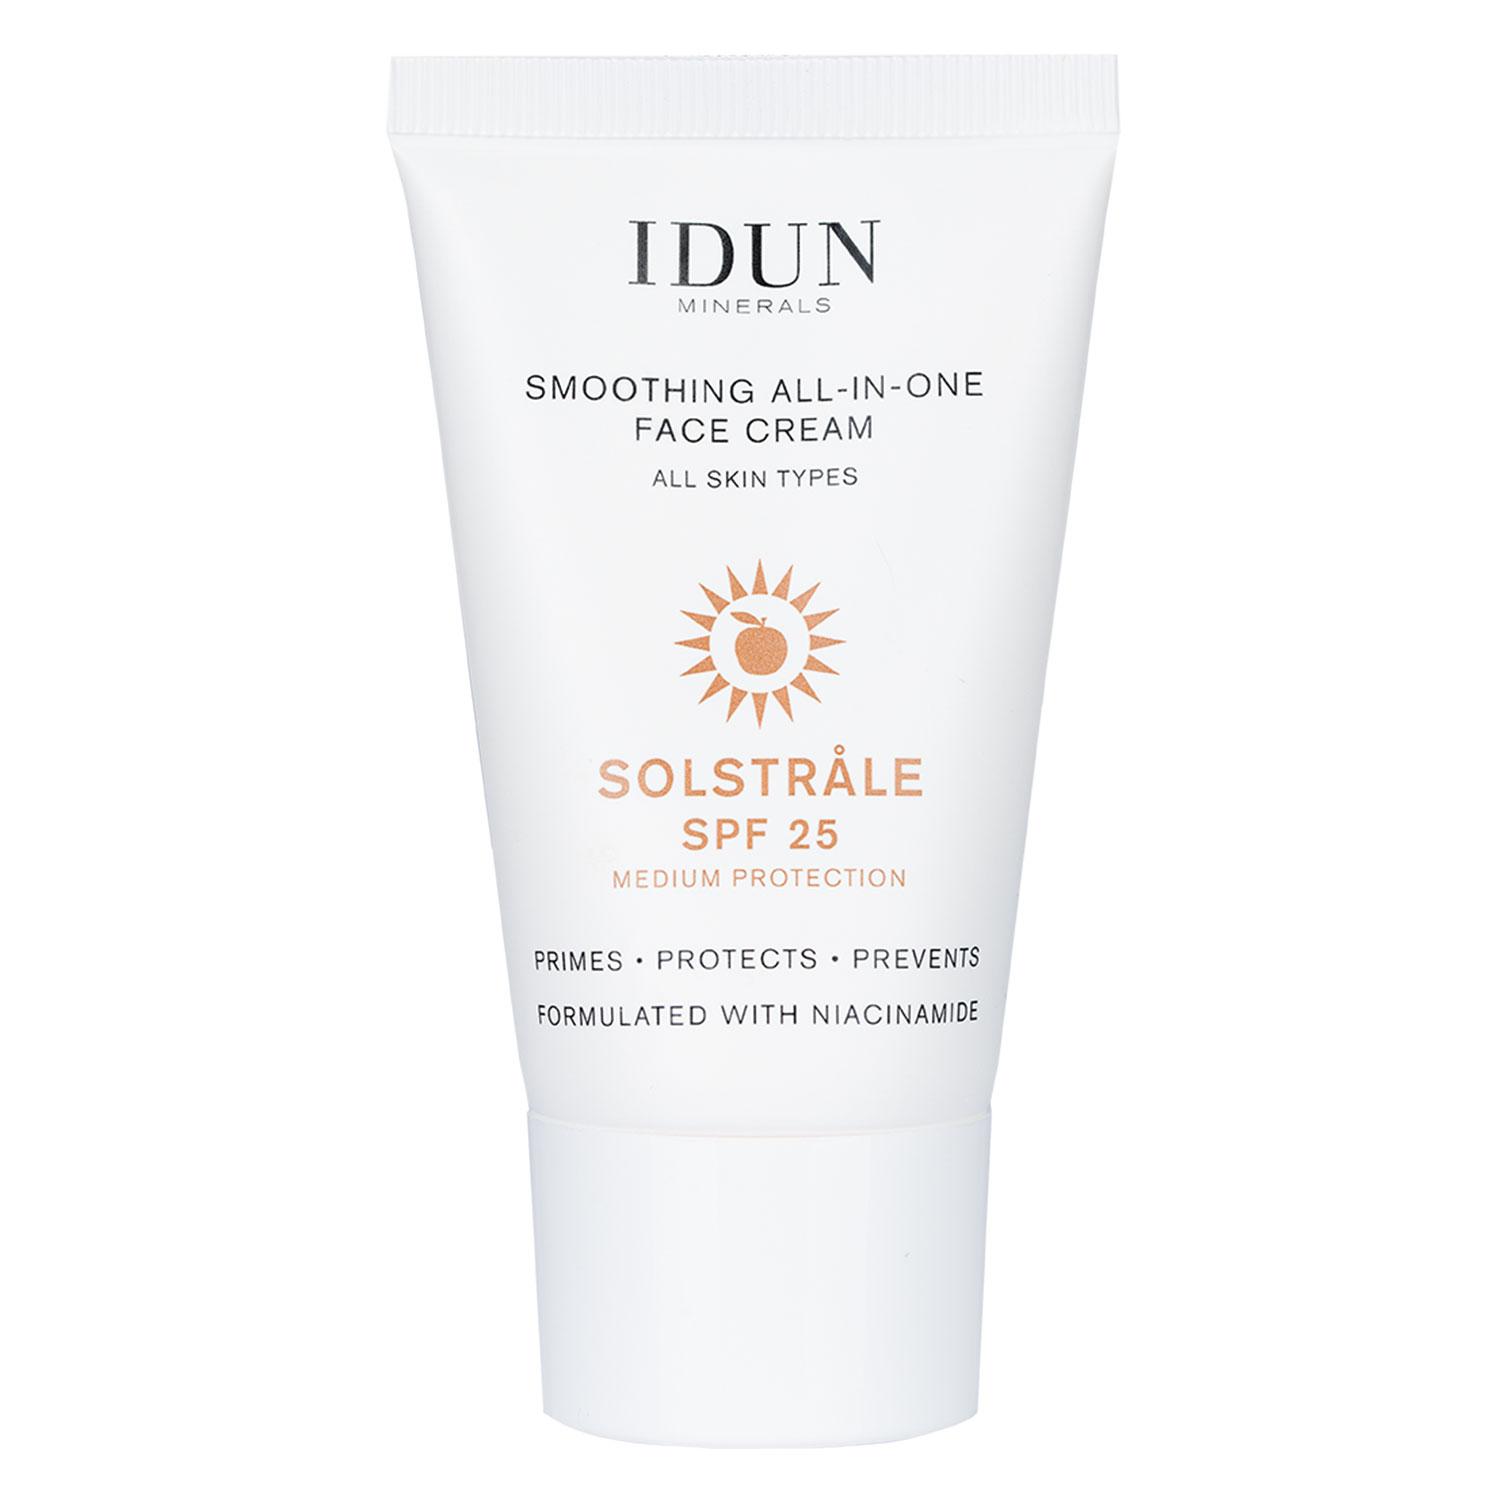 IDUN Teint - Smoothing All-in-One Face Cream Solstråle SPF 25